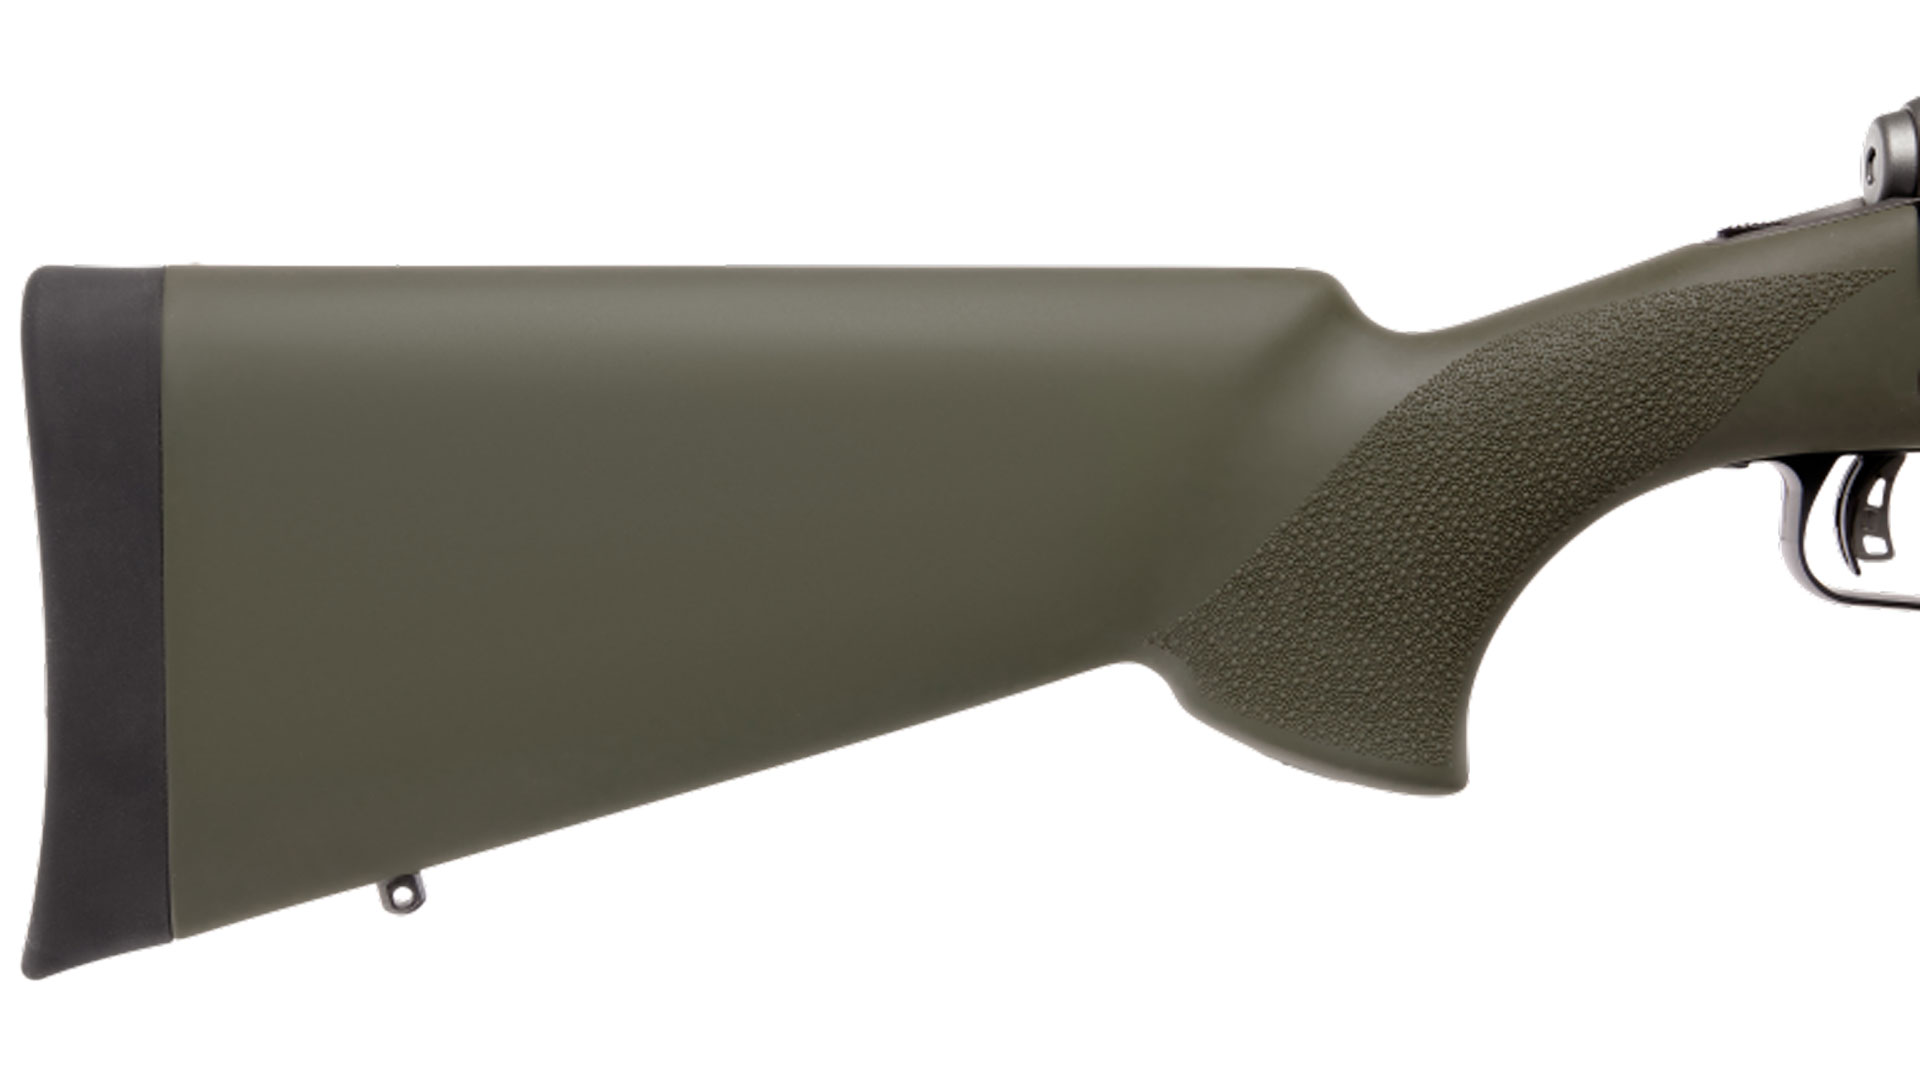 Buttstock with rubber recoil pad